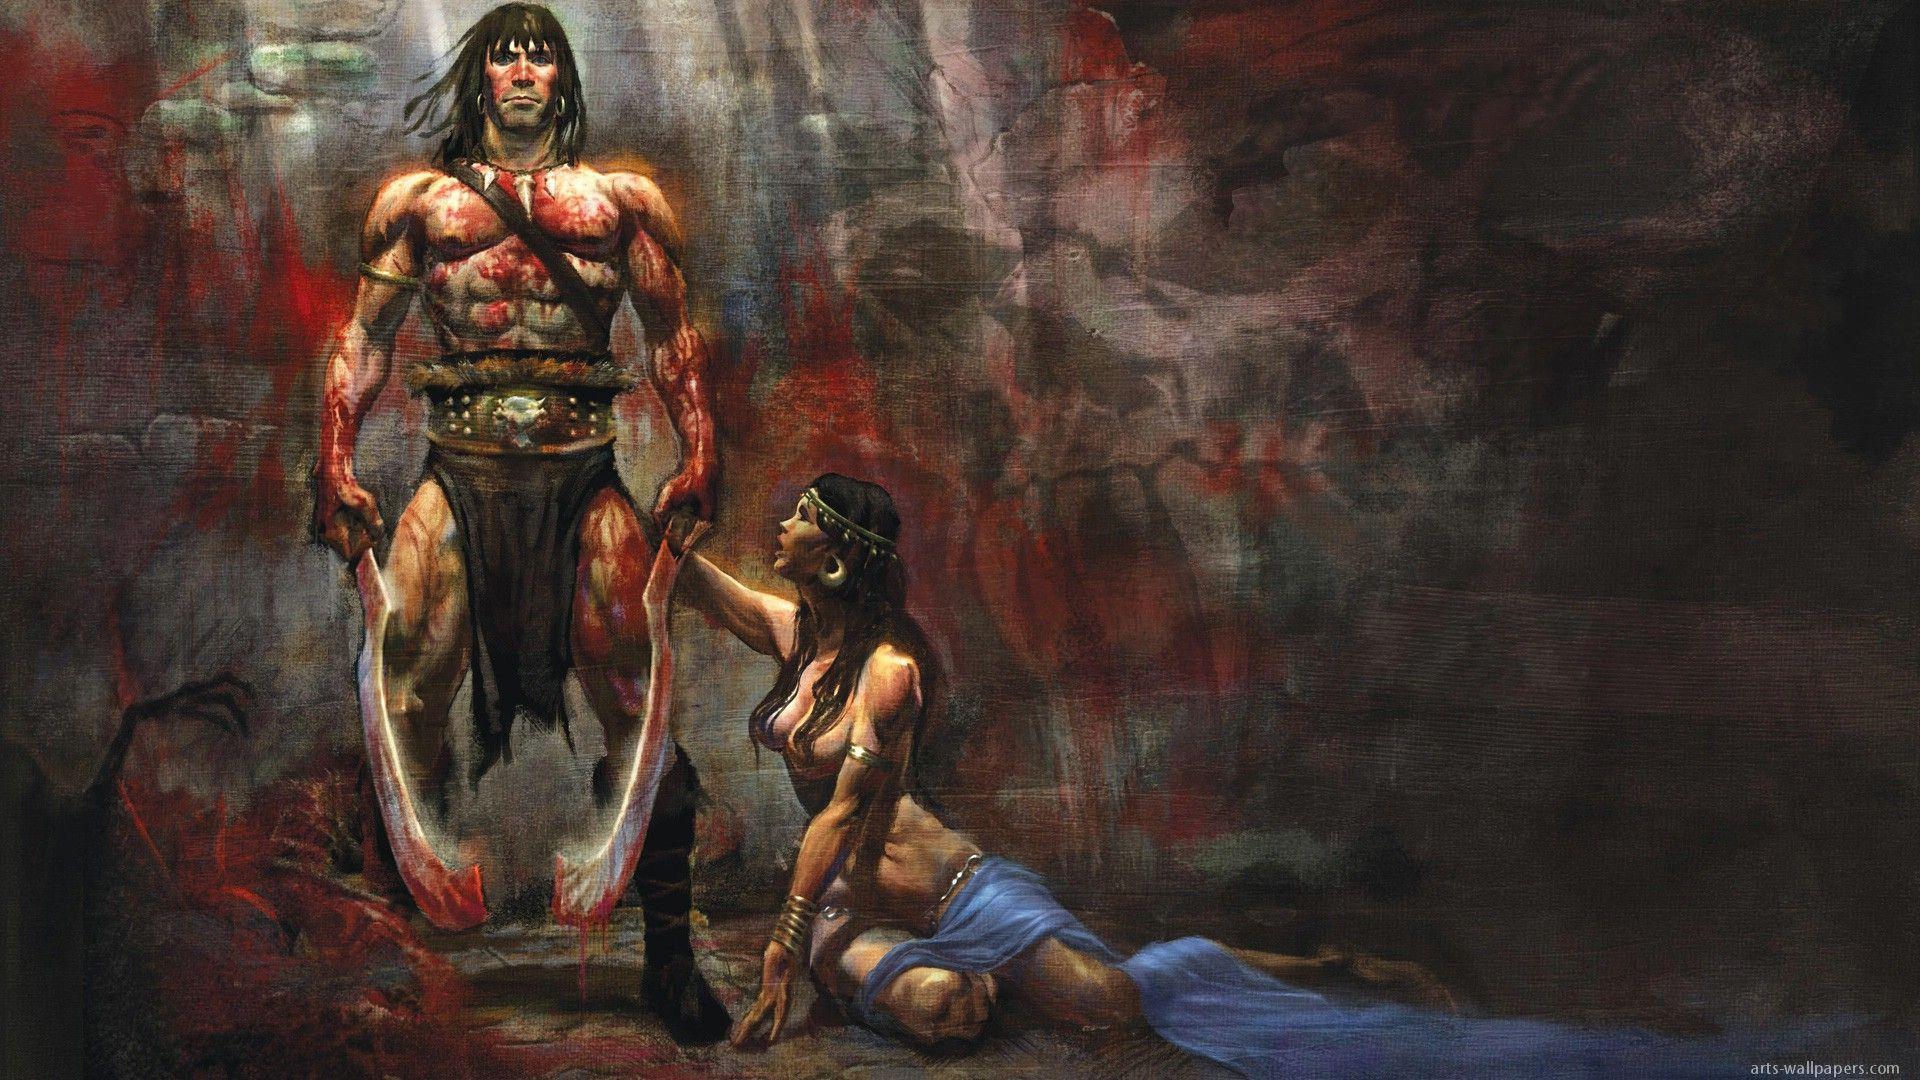 Conan The Barbarian Wallpapers Image & Pictures